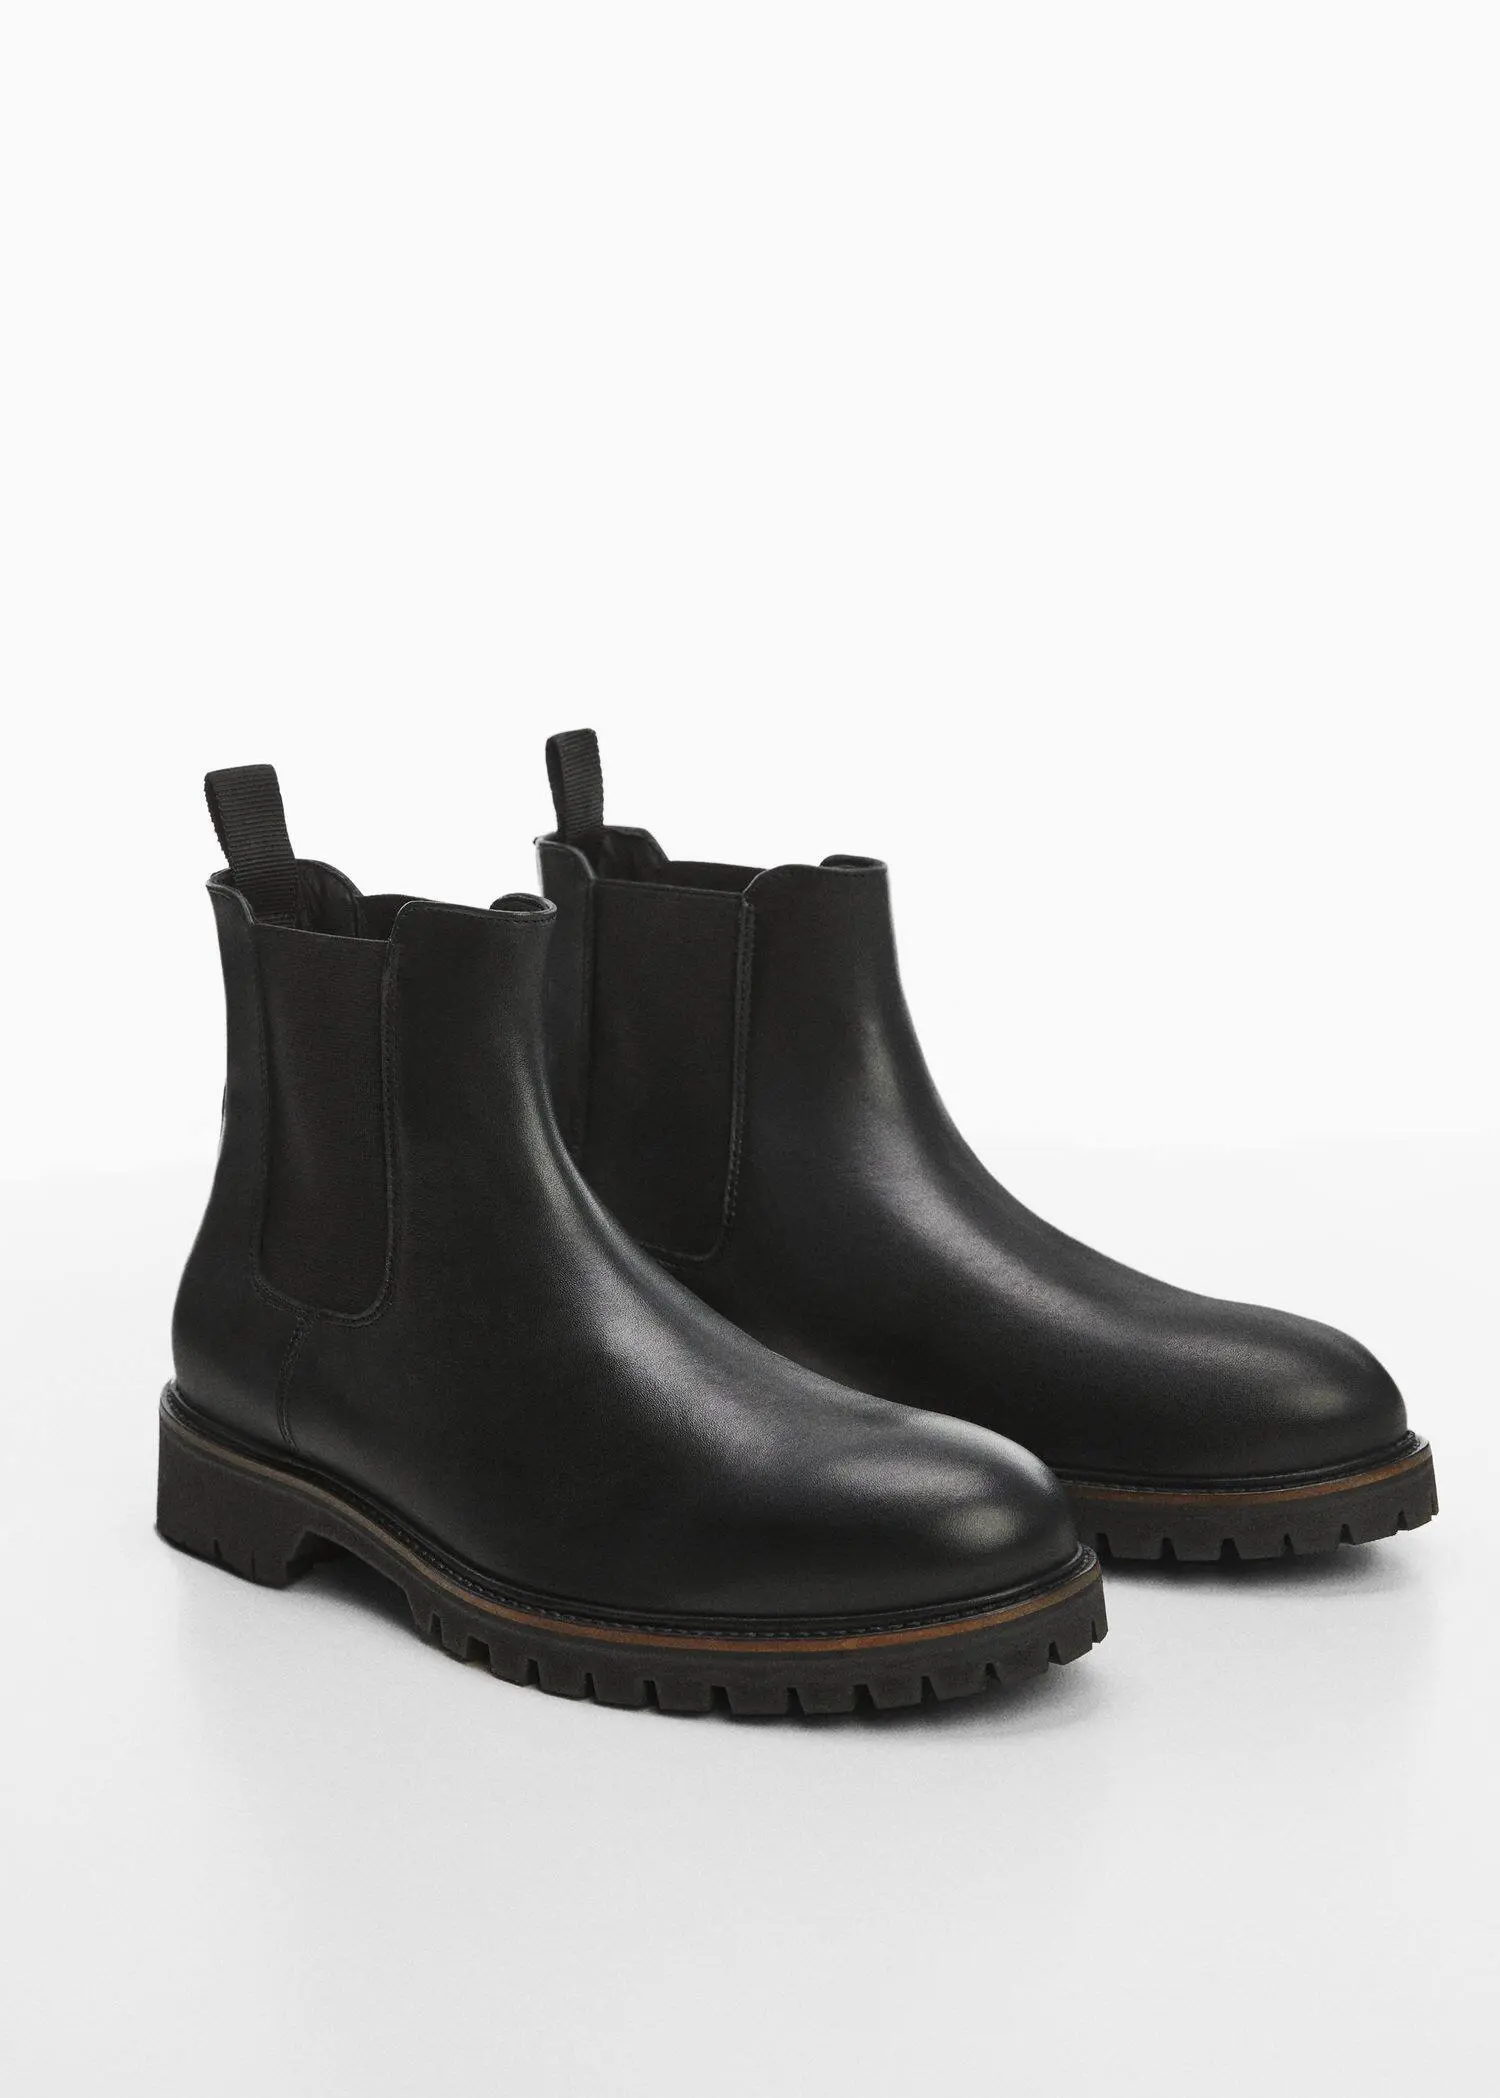 Mango Chelsea leather ankle boots with track sole. 3